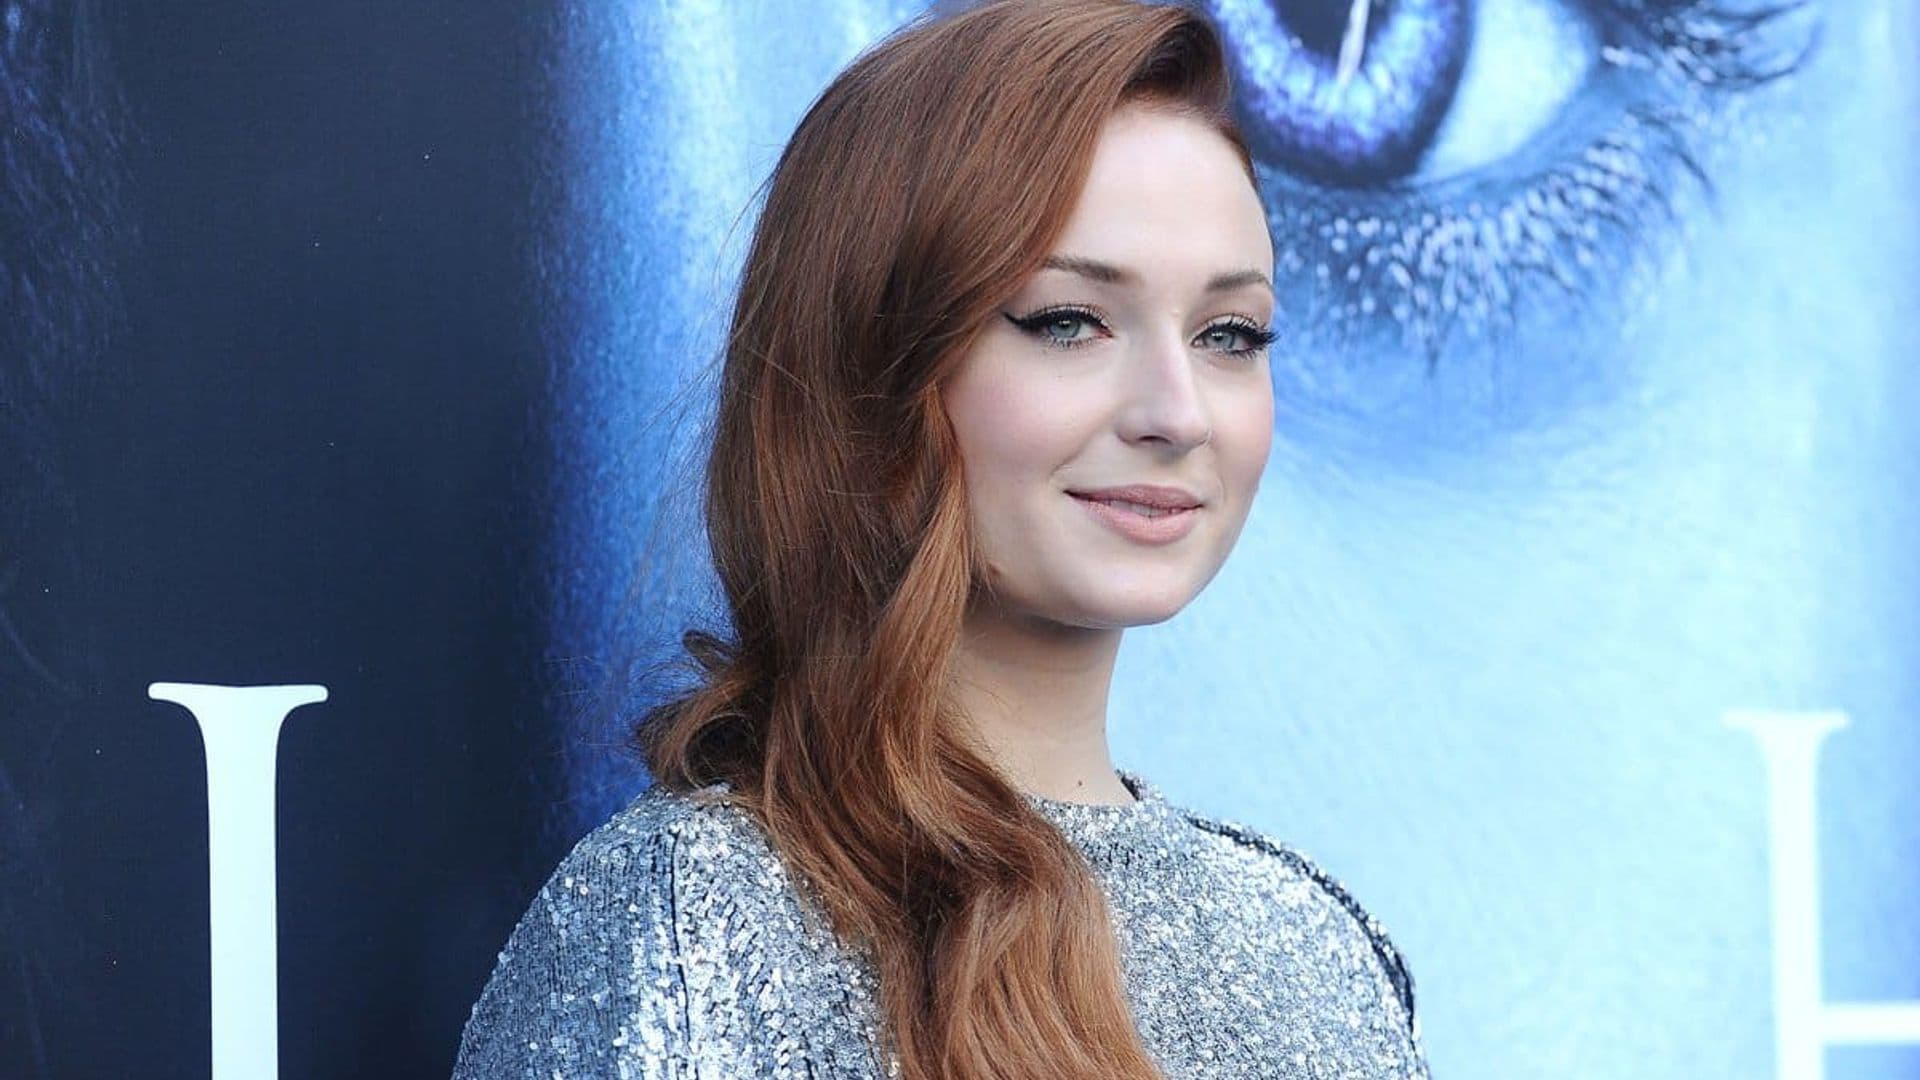 Sophie Turner goes back to red hair for the first time since ‘Game of Thrones’